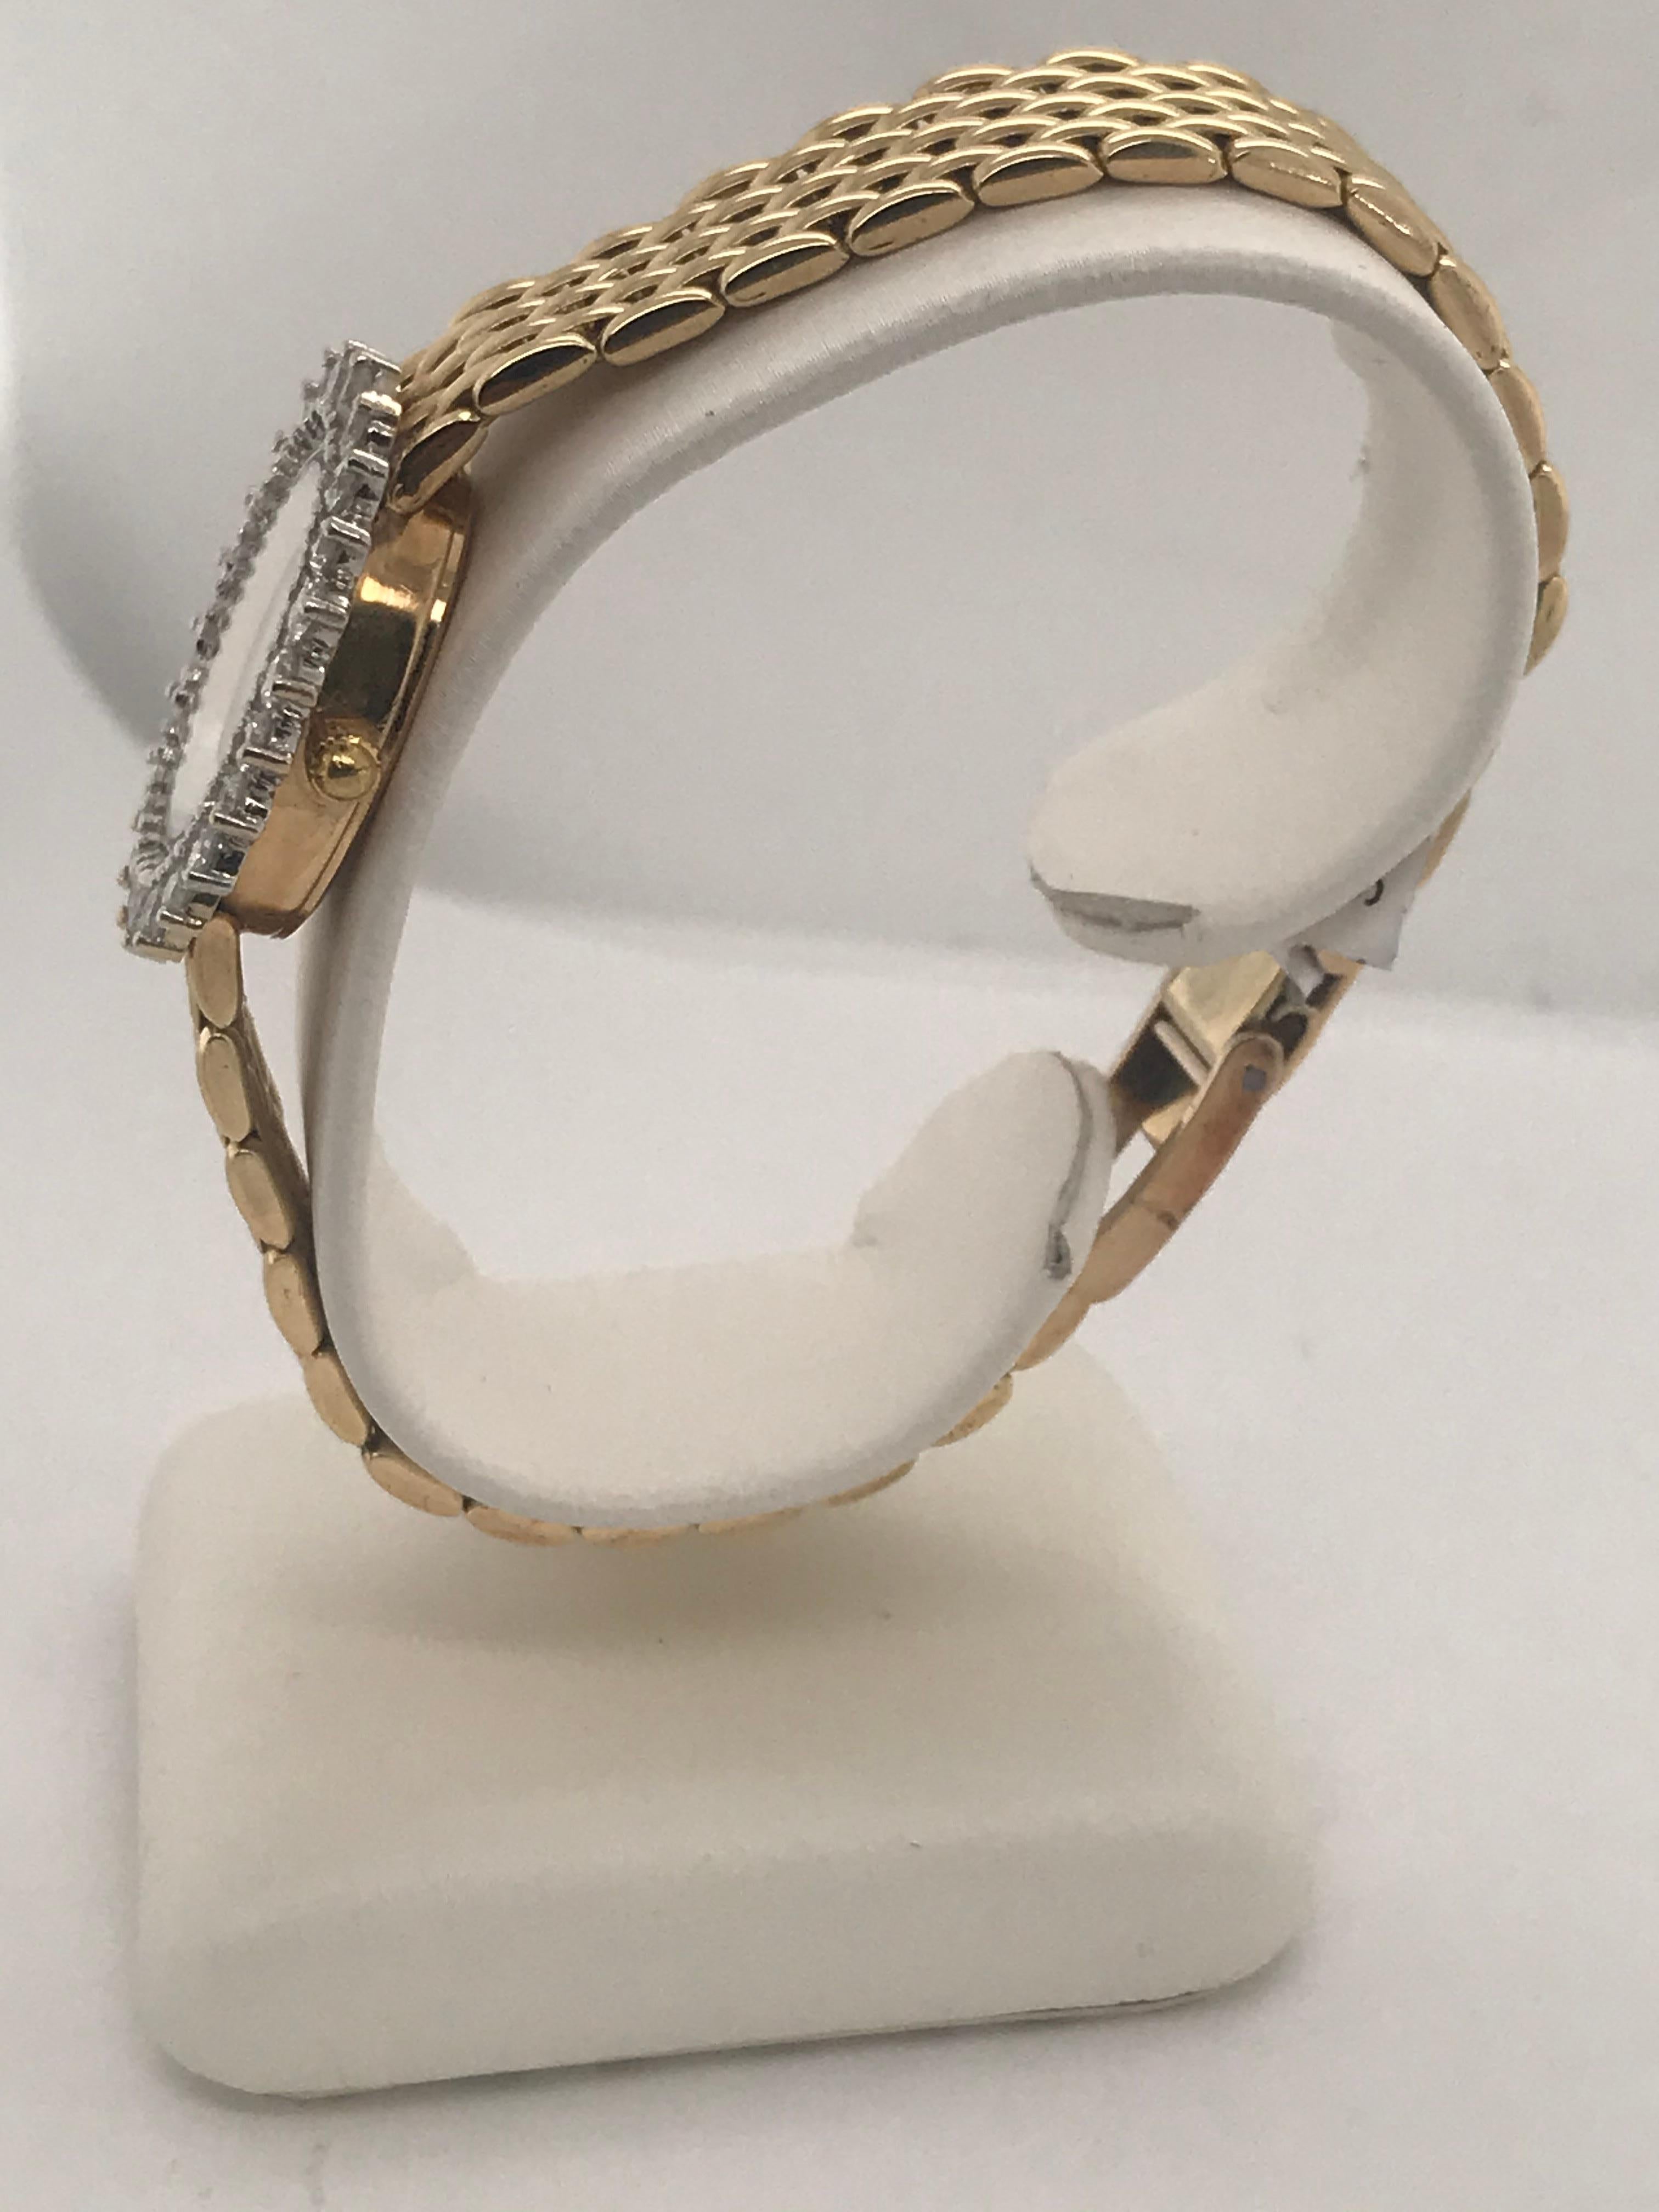 This 14K yellow gold 7 row rounded brick pattern Geneve watch has 24 brilliant cut diamonds totaling approximately 2.00ct total weight.  It's beautiful mother of pearl dial makes it an easy read for any time of the day.  This watch also has an easy